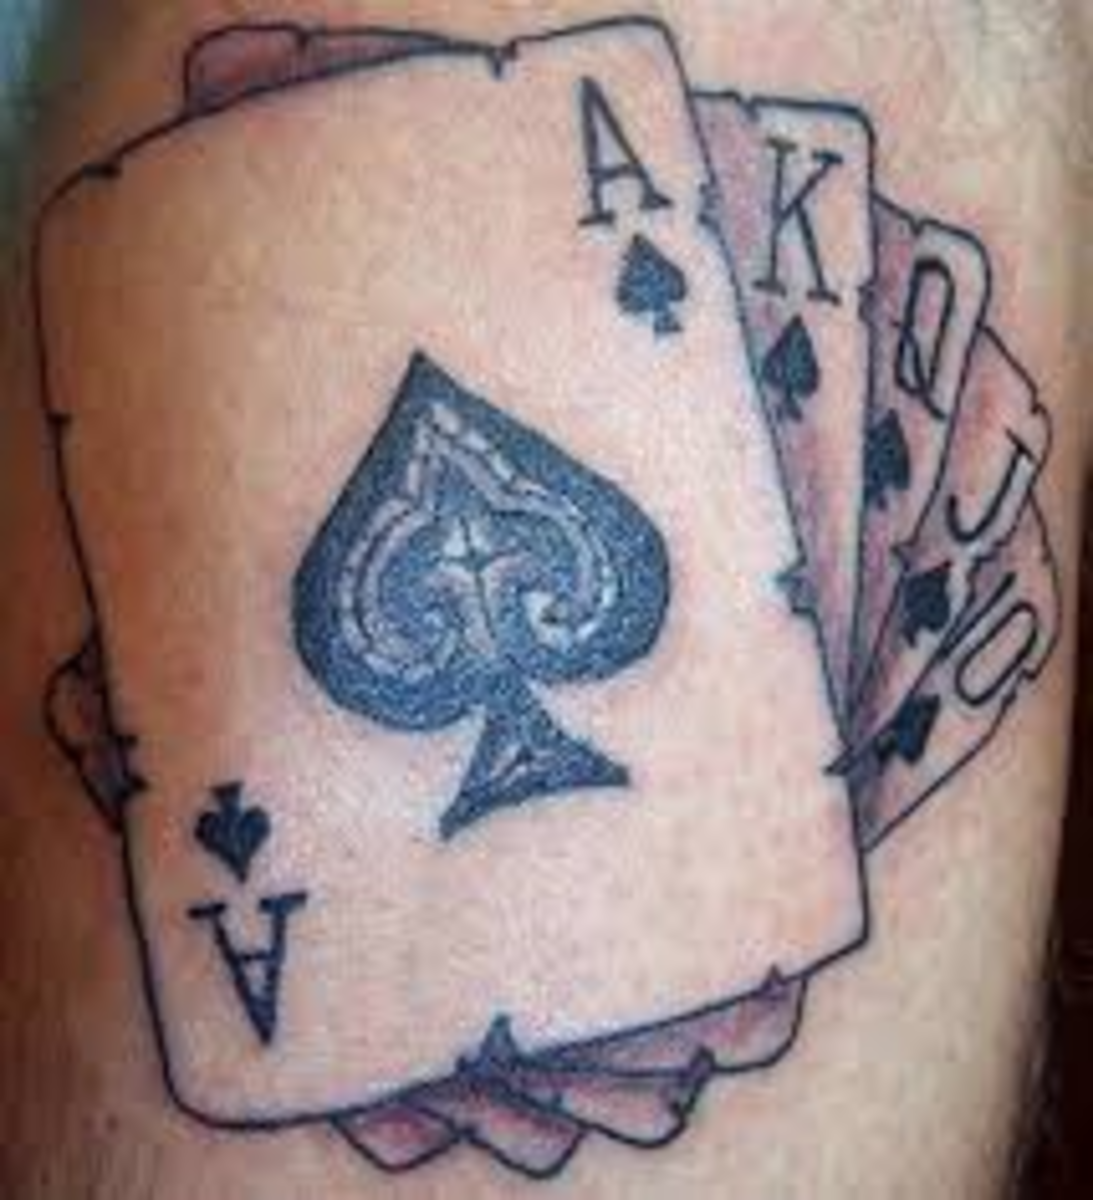 Ace of Spades Tattoos: Designs, Ideas, and Meanings